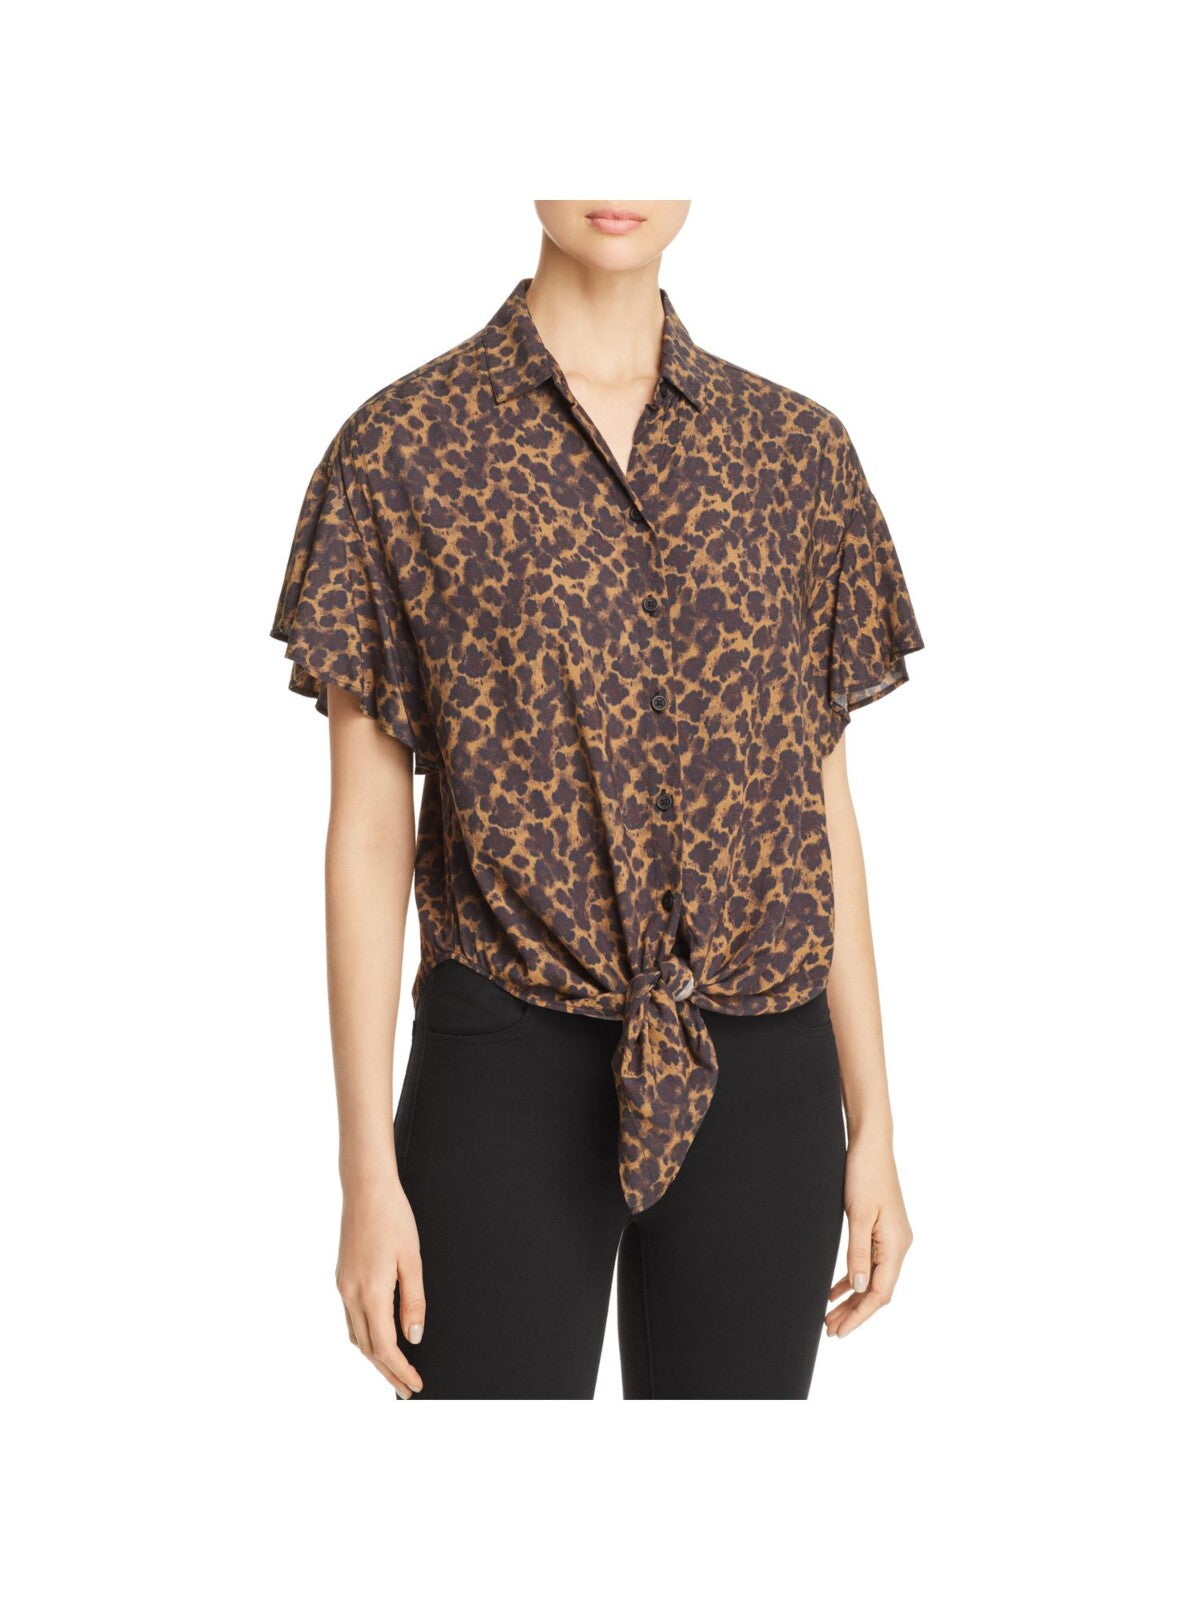 BEACHLUNCHLOUNGE COLLECTION Womens Brown Pleated Tie Front Animal Print Flutter Sleeve Collared Button Up Top L